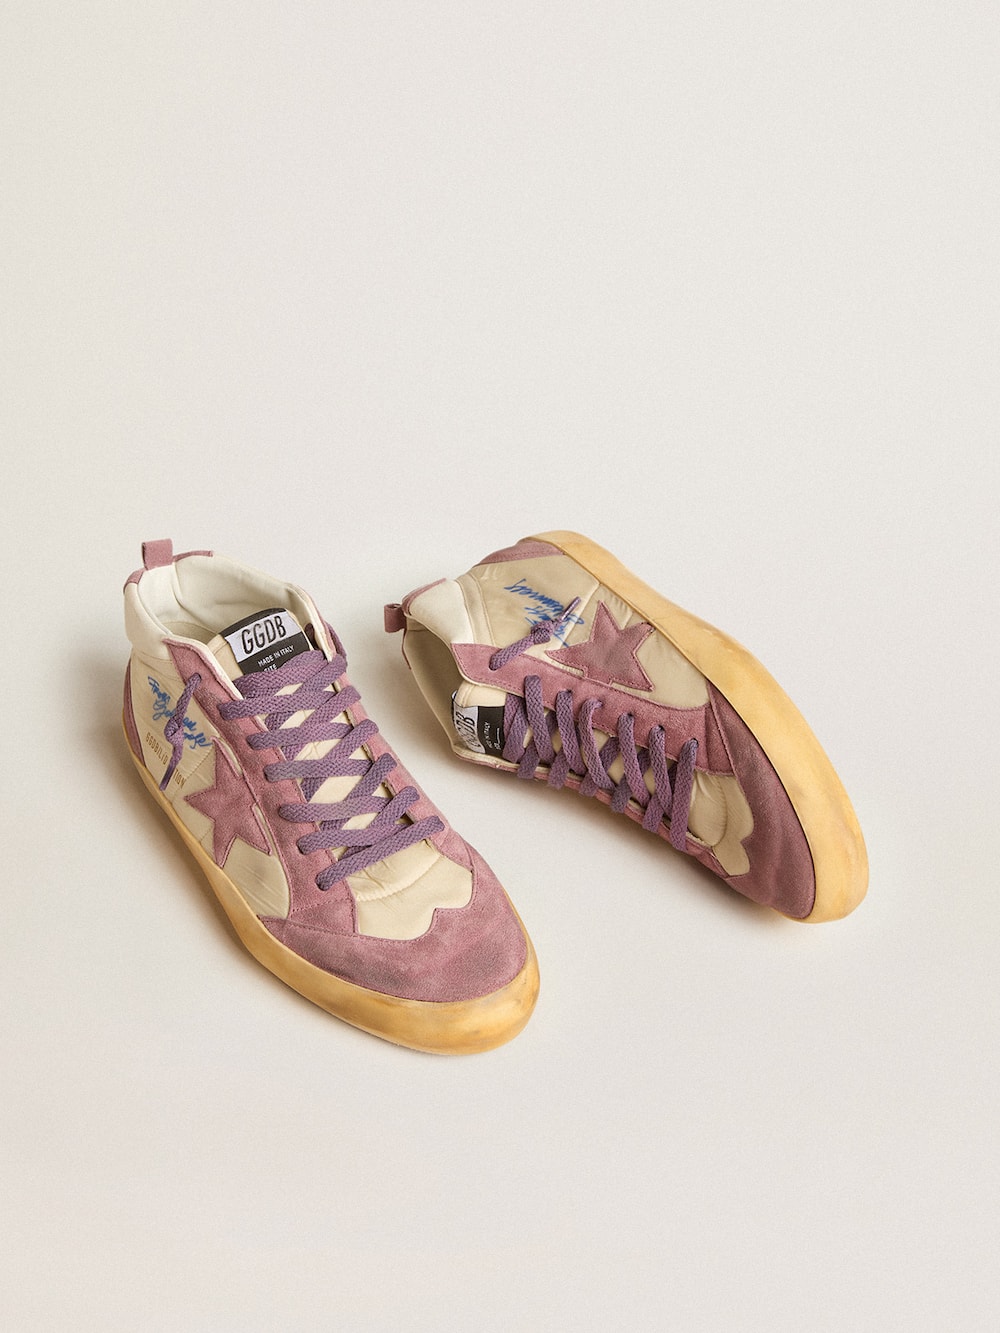 Golden Goose - Men’s Mid Star LAB in nylon and nappa with mauve suede star in 